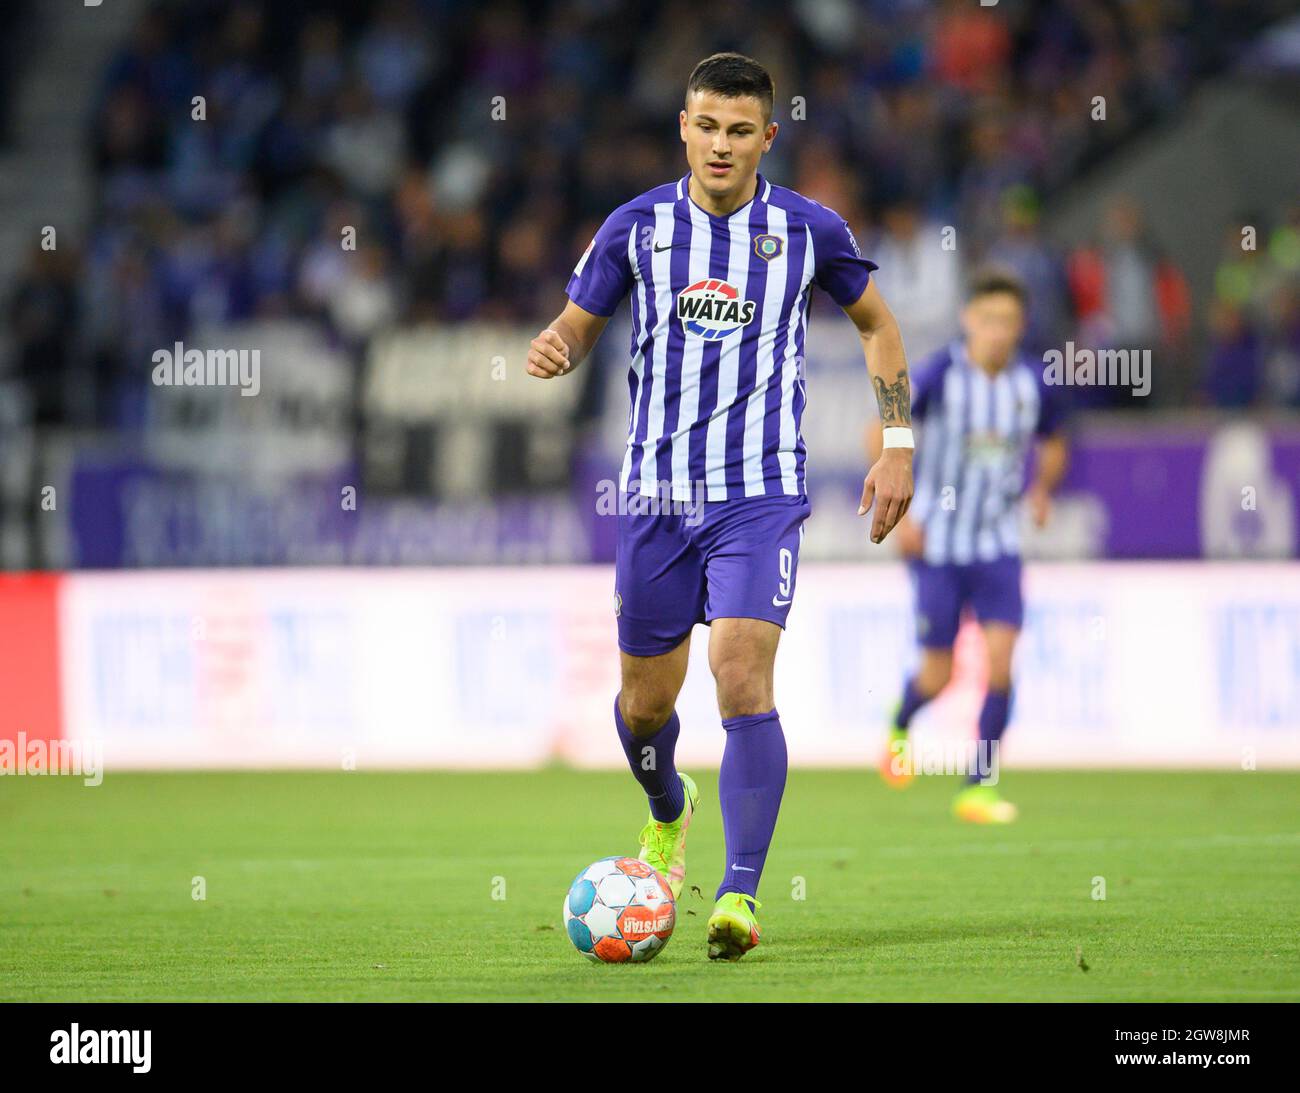 Aue, Germany. 01st Oct, 2021. Football: 2. Bundesliga, FC Erzgebirge Aue - Hamburger SV, Matchday 9, Erzgebirgsstadion. Aue's Antonio Jonjic plays the ball. Credit: Robert Michael/dpa-Zentralbild/dpa - IMPORTANT NOTE: In accordance with the regulations of the DFL Deutsche Fußball Liga and/or the DFB Deutscher Fußball-Bund, it is prohibited to use or have used photographs taken in the stadium and/or of the match in the form of sequence pictures and/or video-like photo series./dpa/Alamy Live News Stock Photo